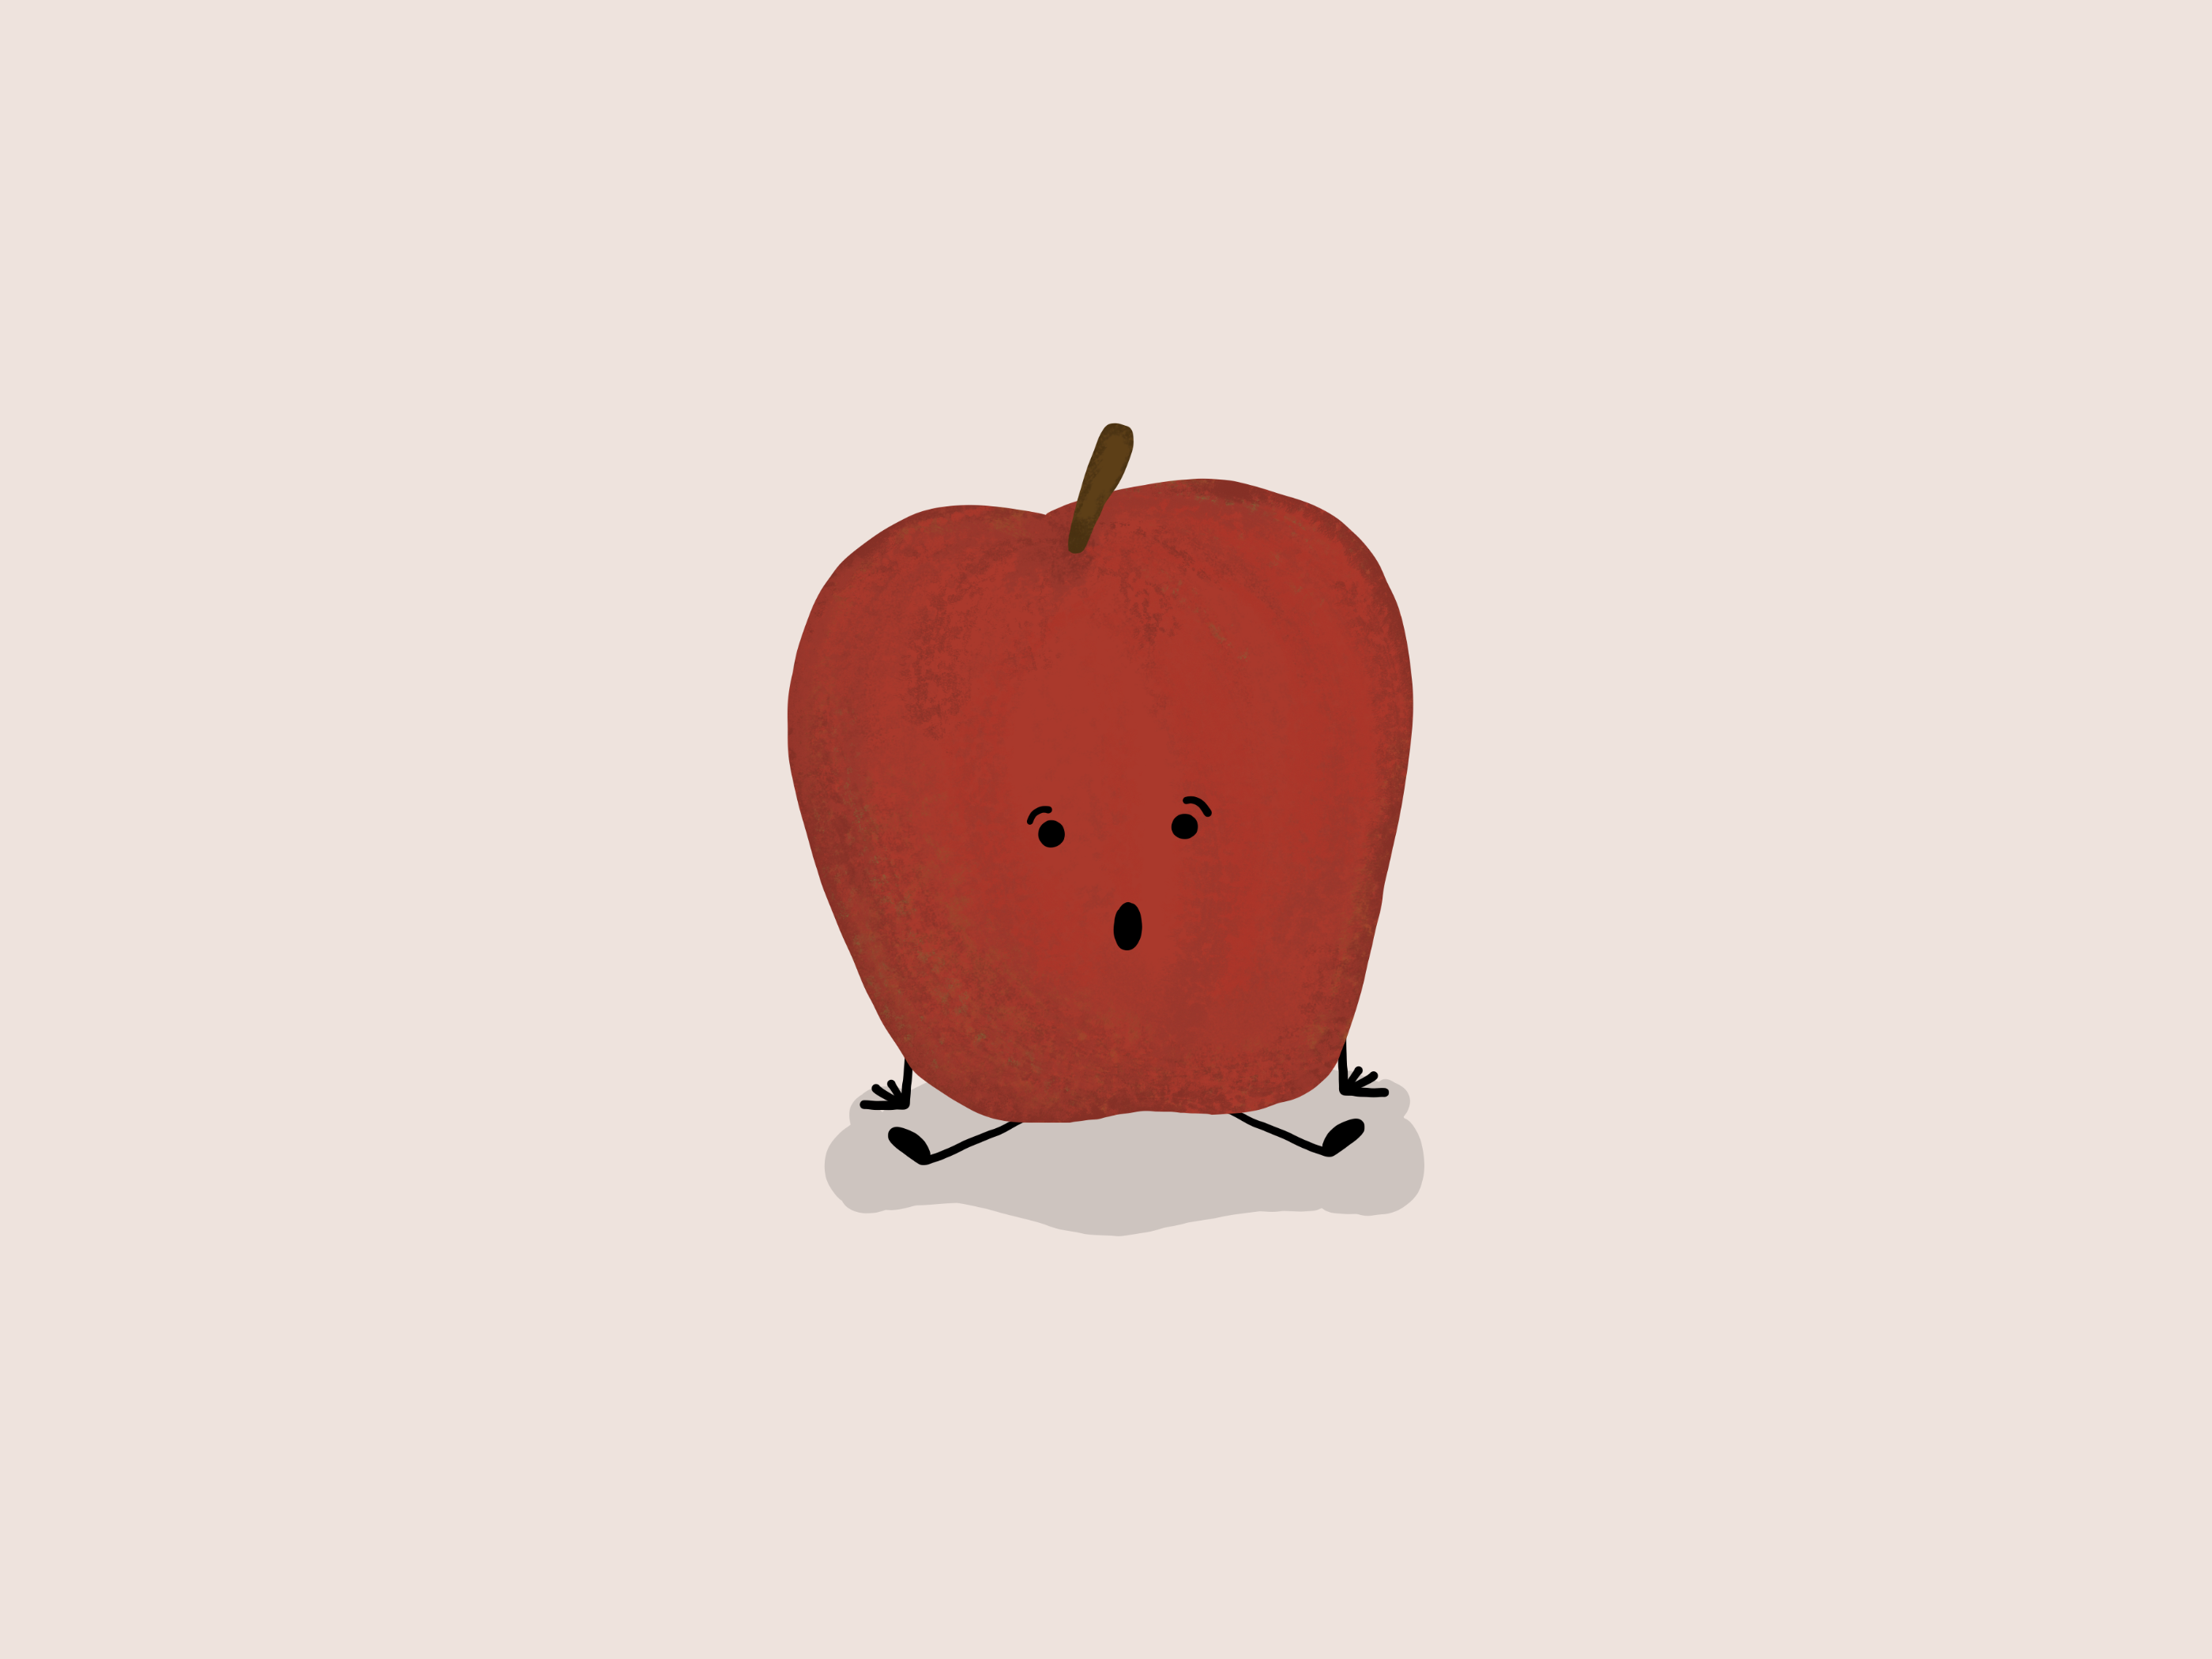 A Clumsy Apple